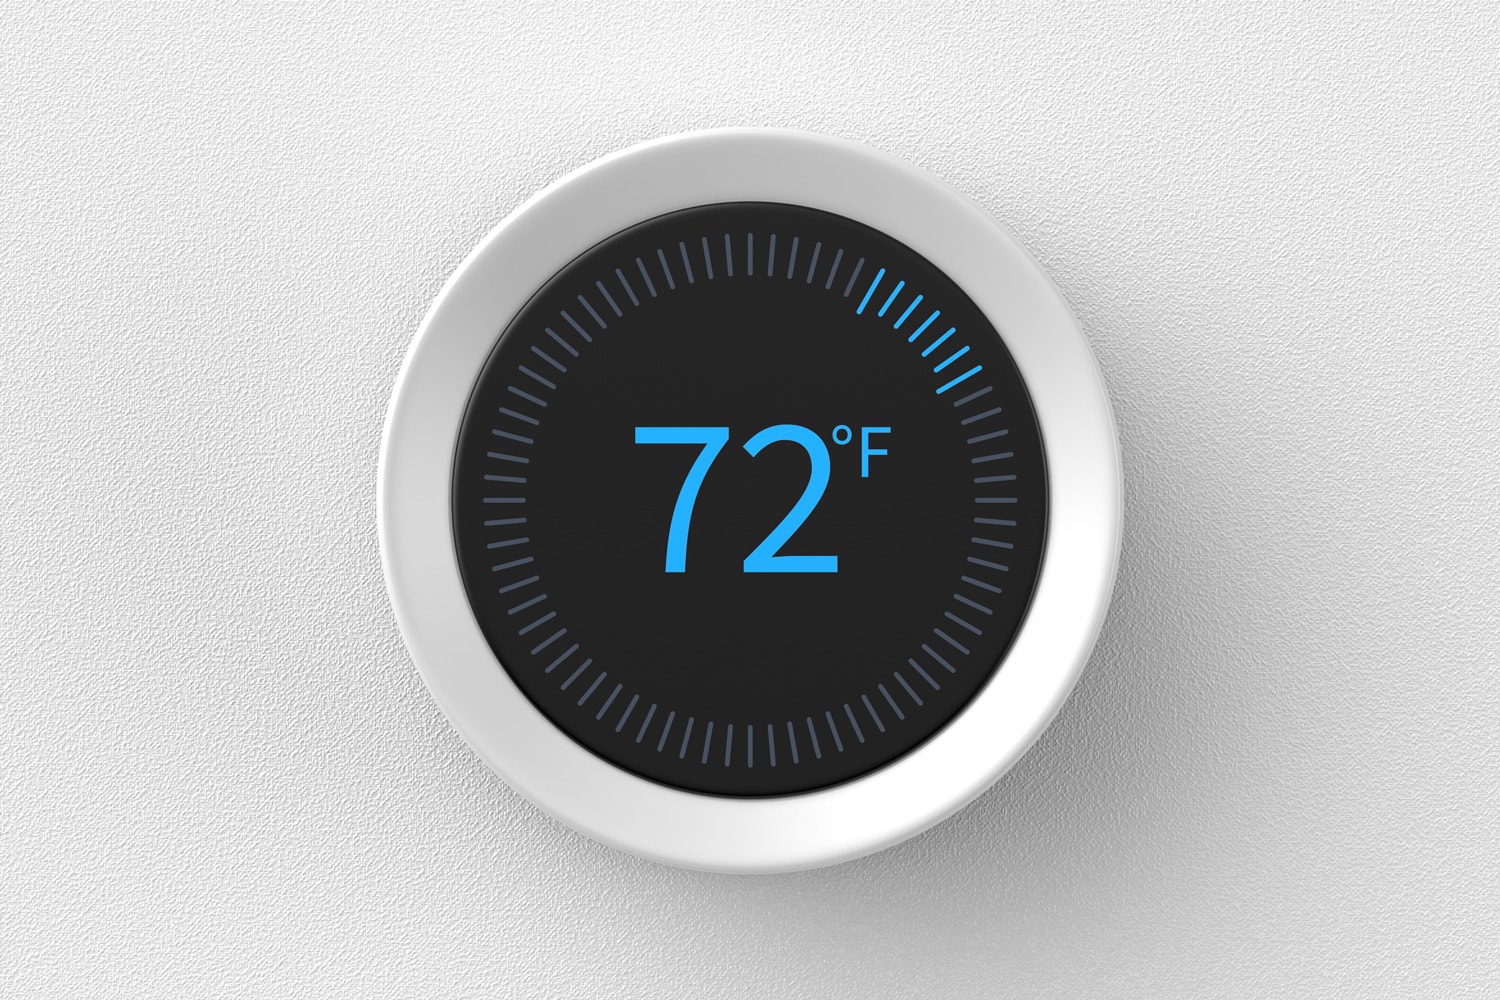 Smart thermostat showing the temperature in Fahrenheit mounted on a white wall